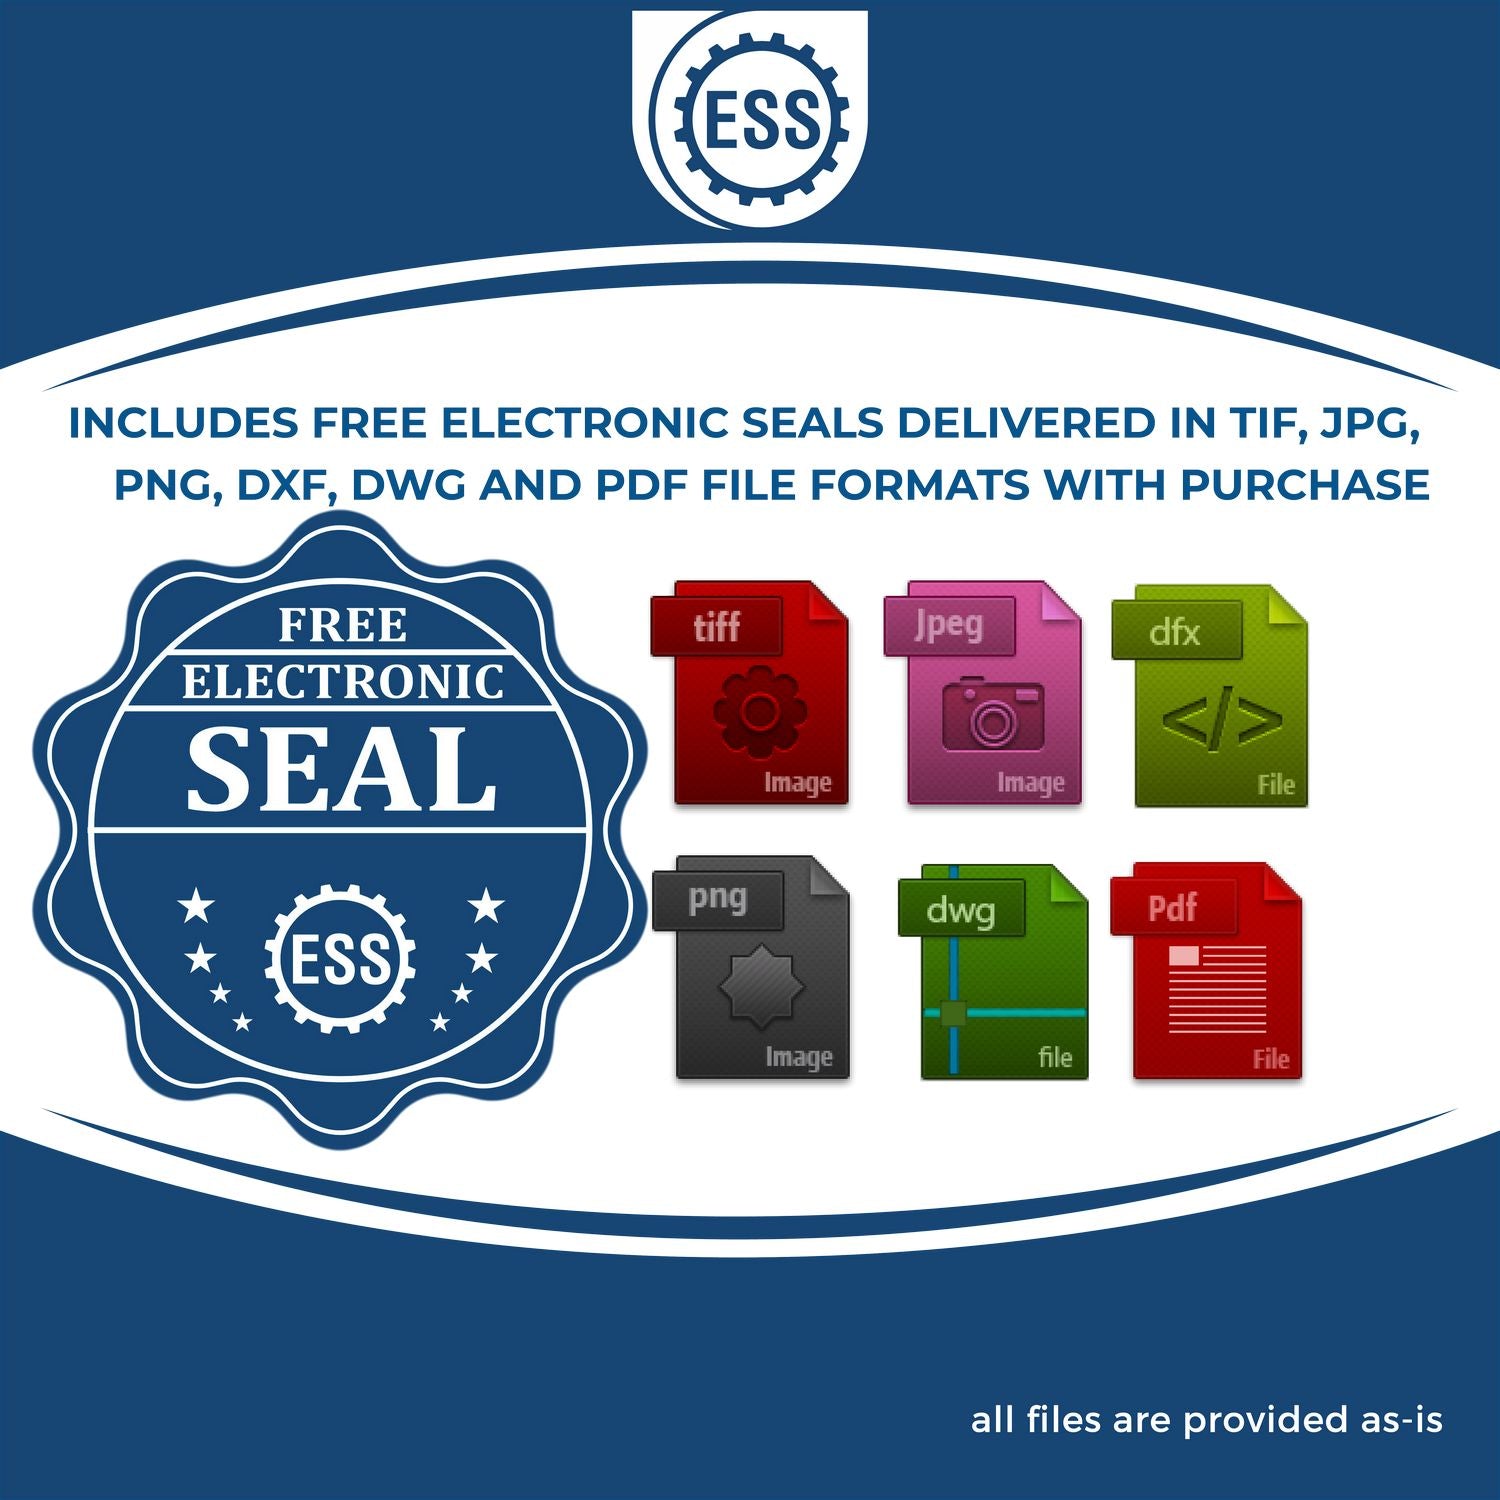 An infographic for the free electronic seal for the Long Reach Wisconsin PE Seal illustrating the different file type icons such as DXF, DWG, TIF, JPG and PNG.